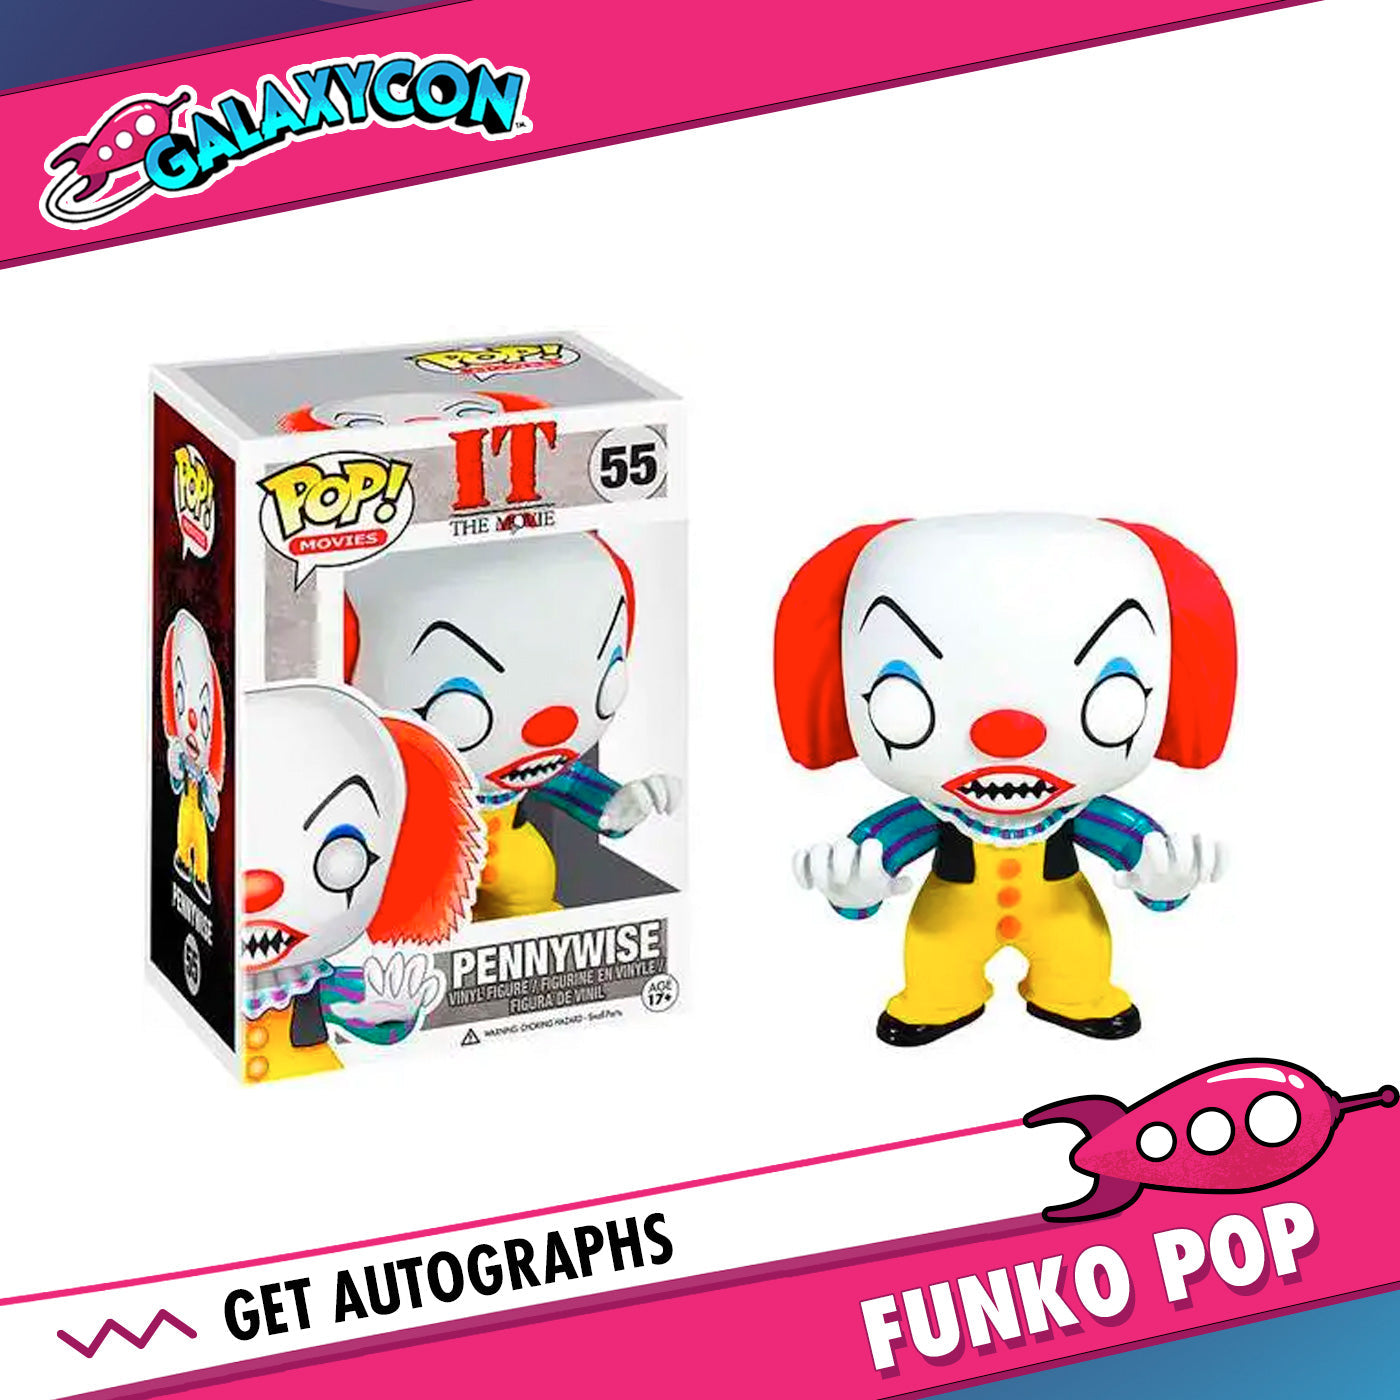 Tim Curry: Autograph Signing on Funko's and Mego's, June 29th